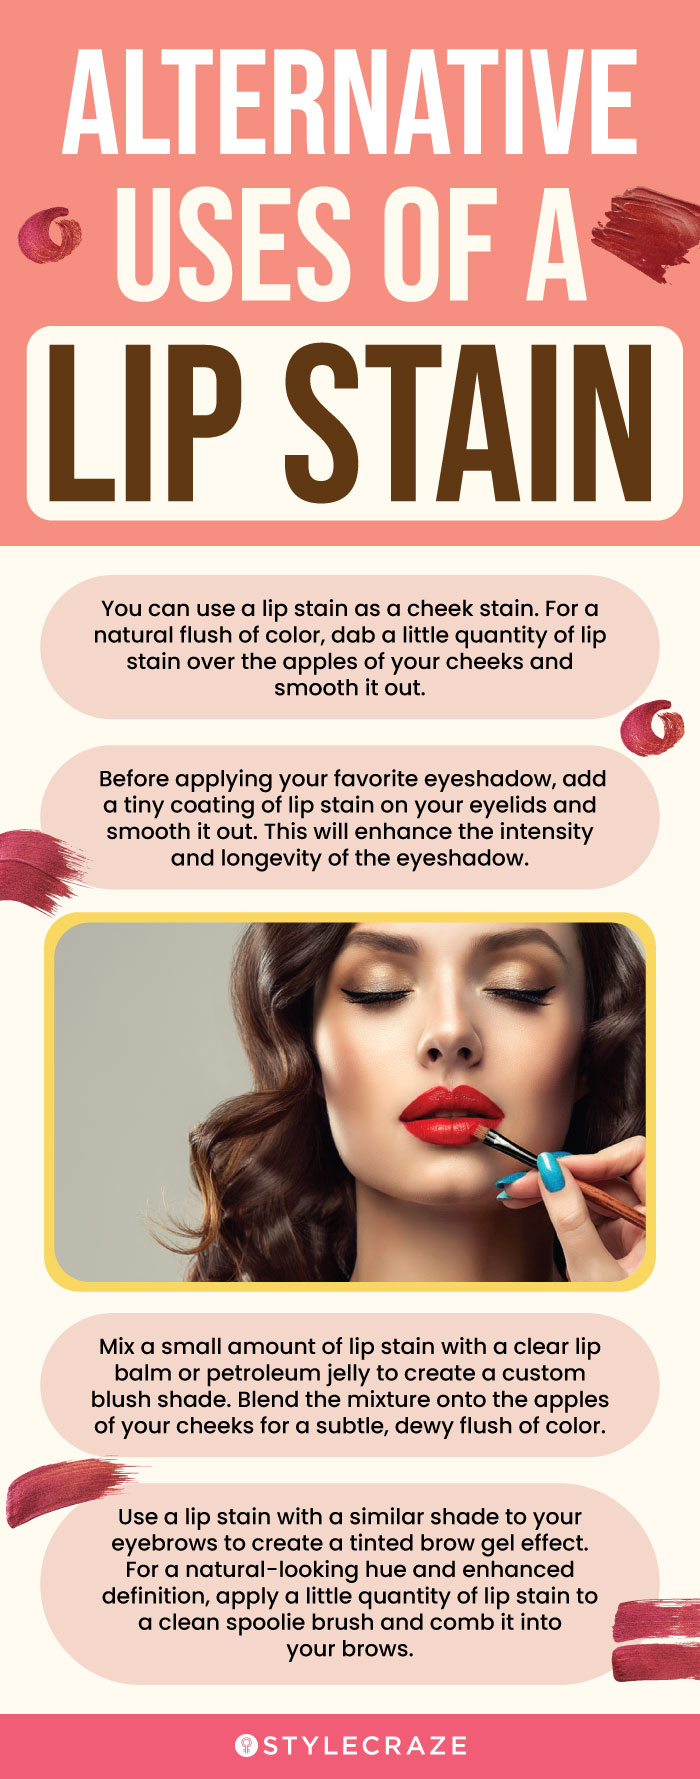 Alternative Uses Of Lip Stain (infographic)